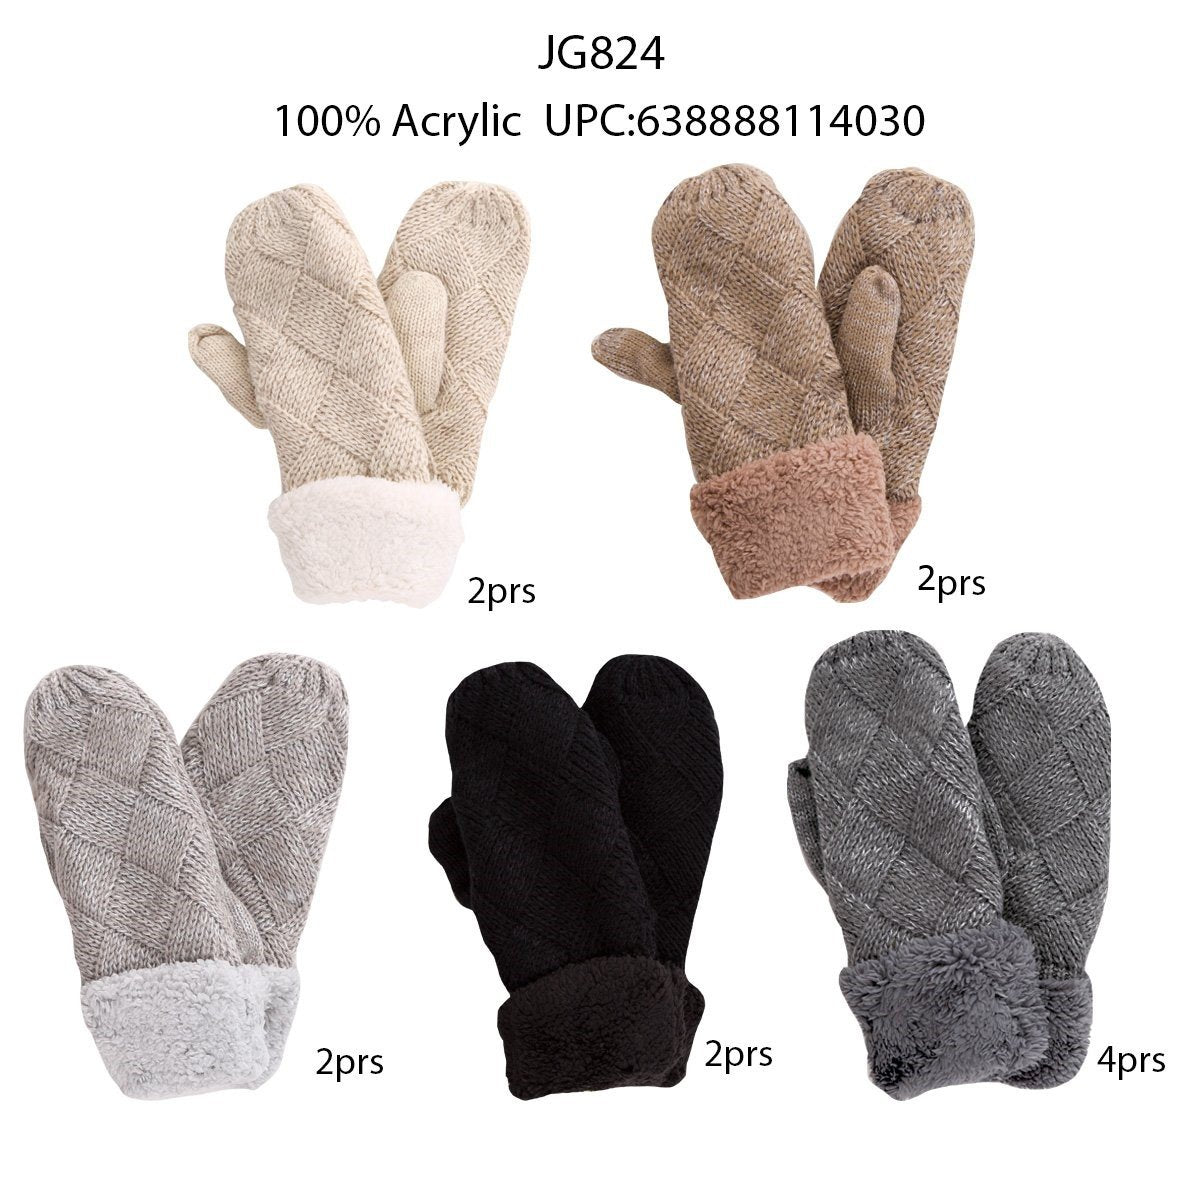 Solid Color Knitted Mittens W/ Fleece Cuffs - 12Pc Set